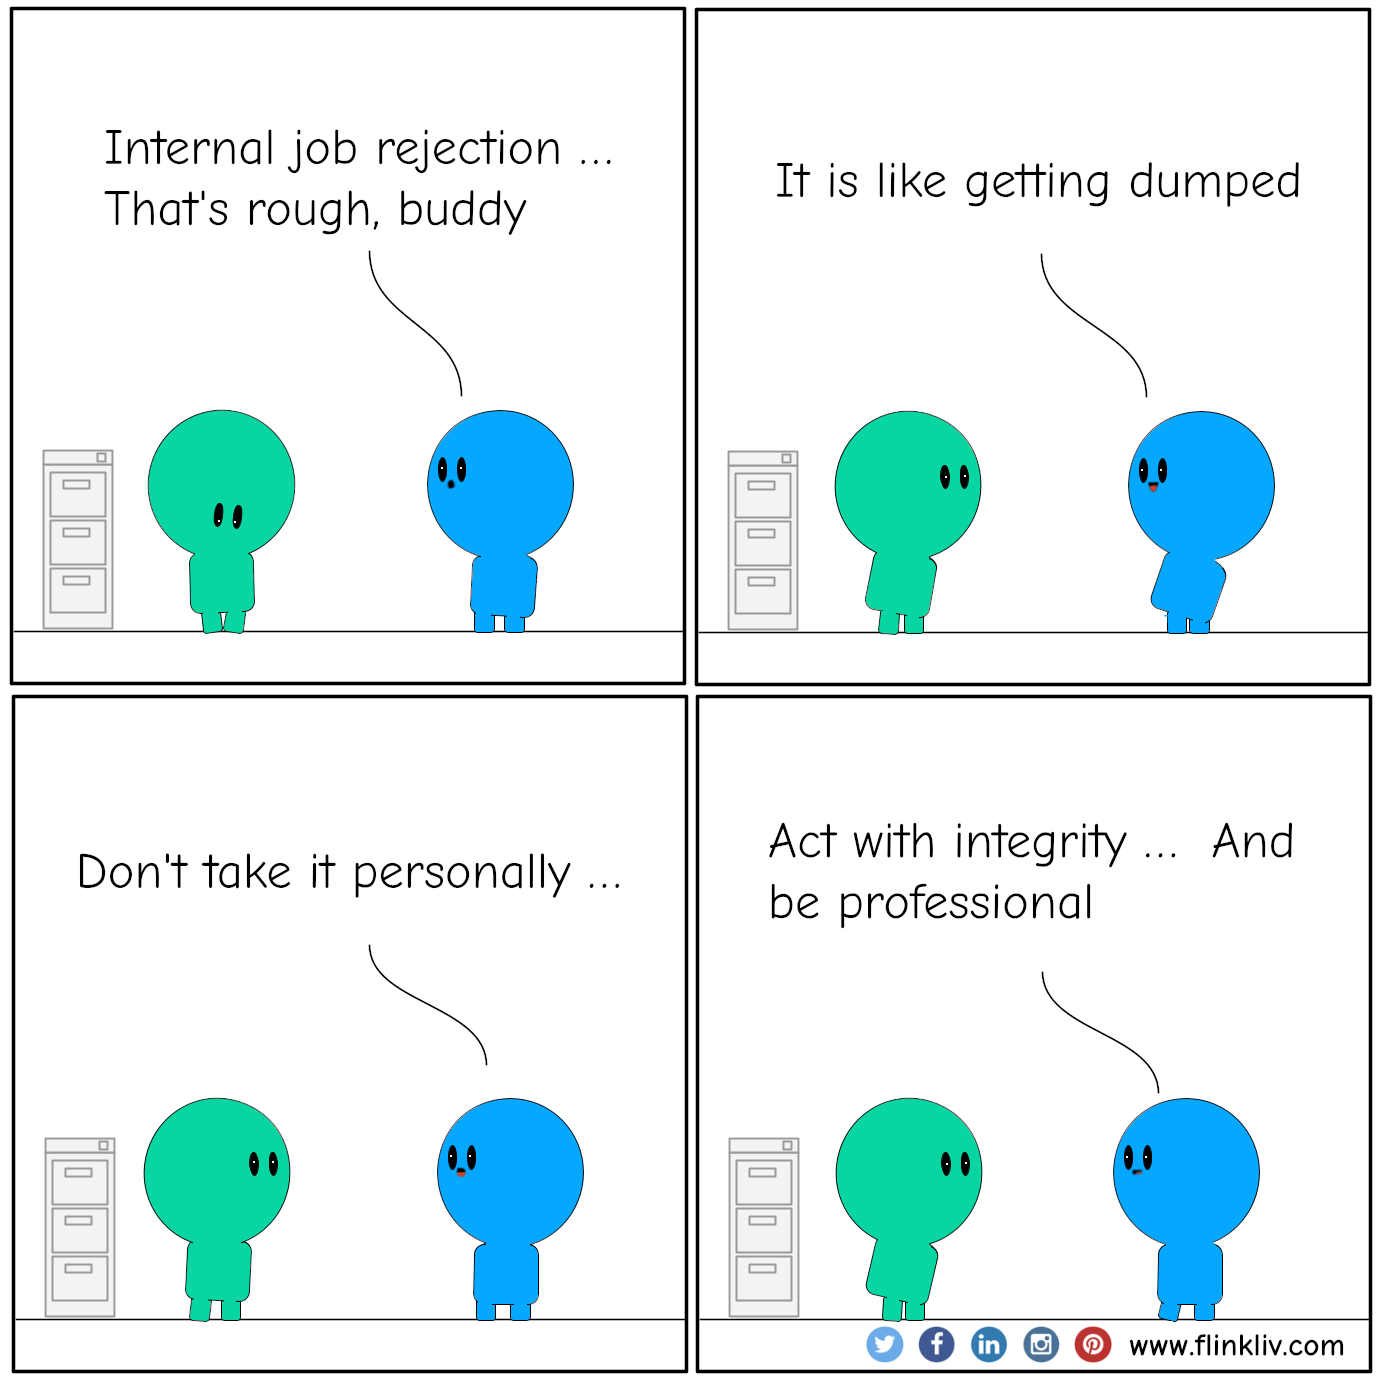 Conversation between A and B about how to handle internal job rejection. B: Internal job rejection, That's rough, buddy. B: It is like getting dumped. B: Don't take it personally. B: Act with integrity, and be professional. By flinkliv.com